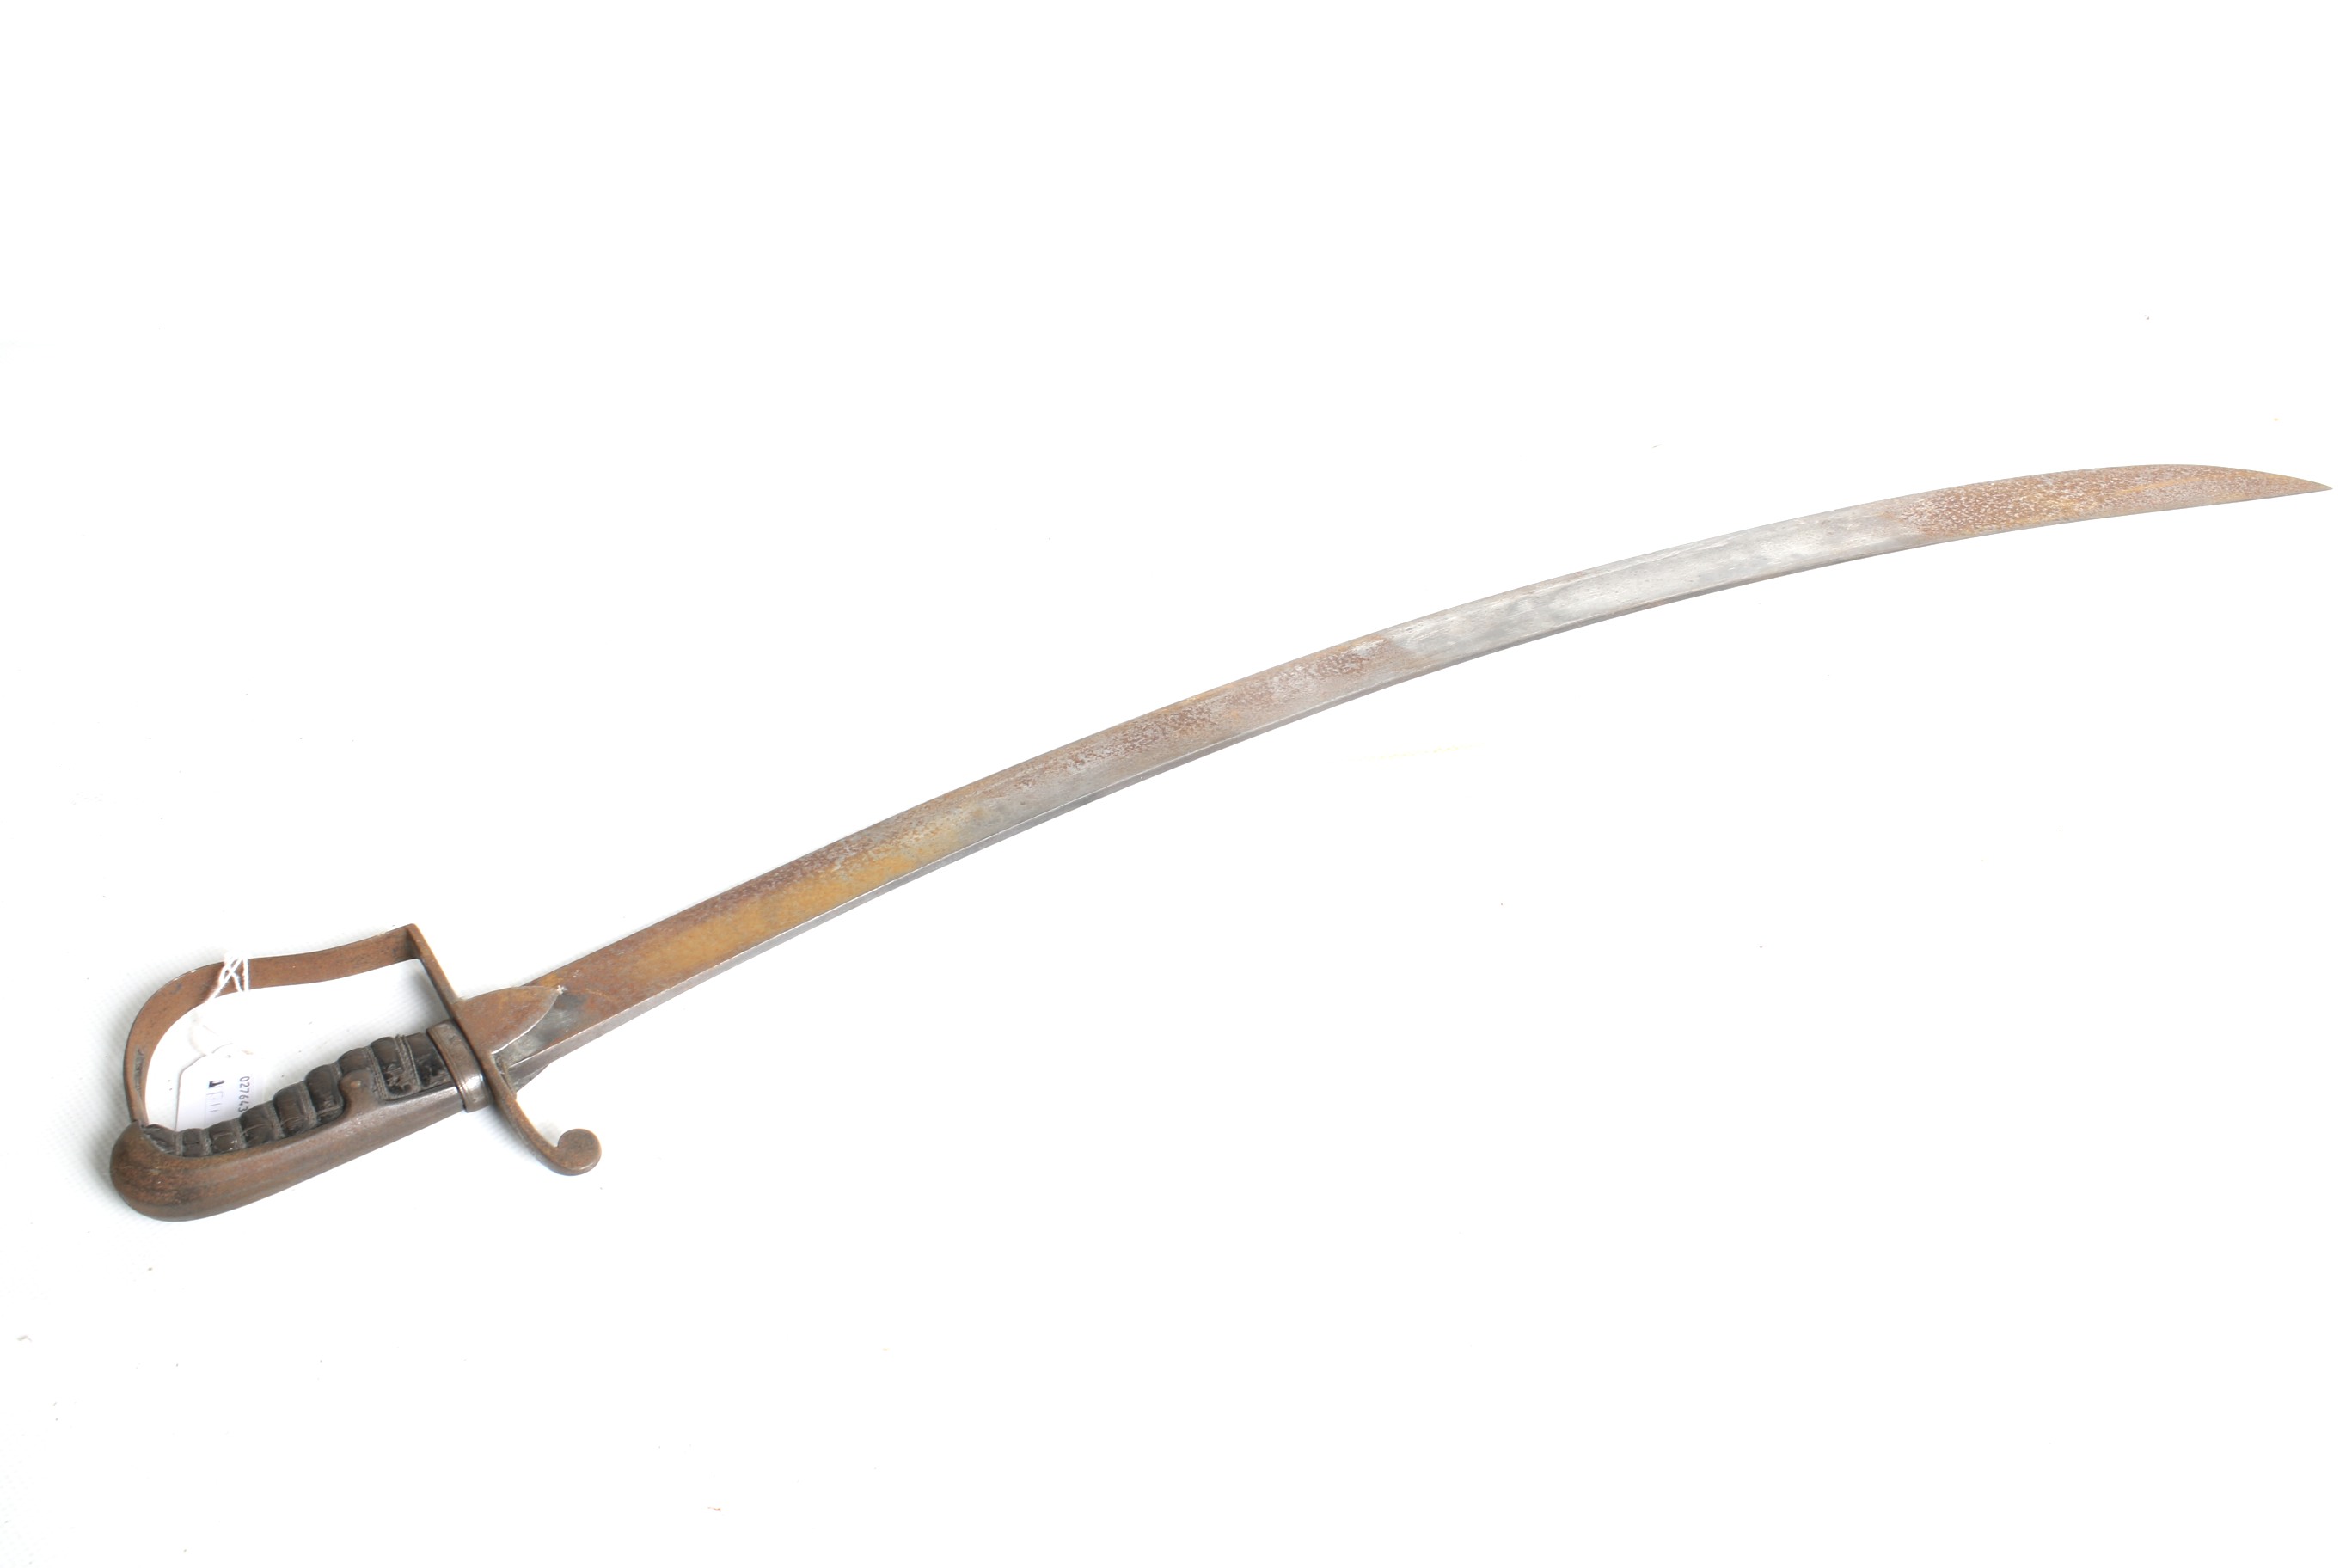 A possibly Napoleonic period British 1796 pattern cavalry sword. - Image 2 of 3